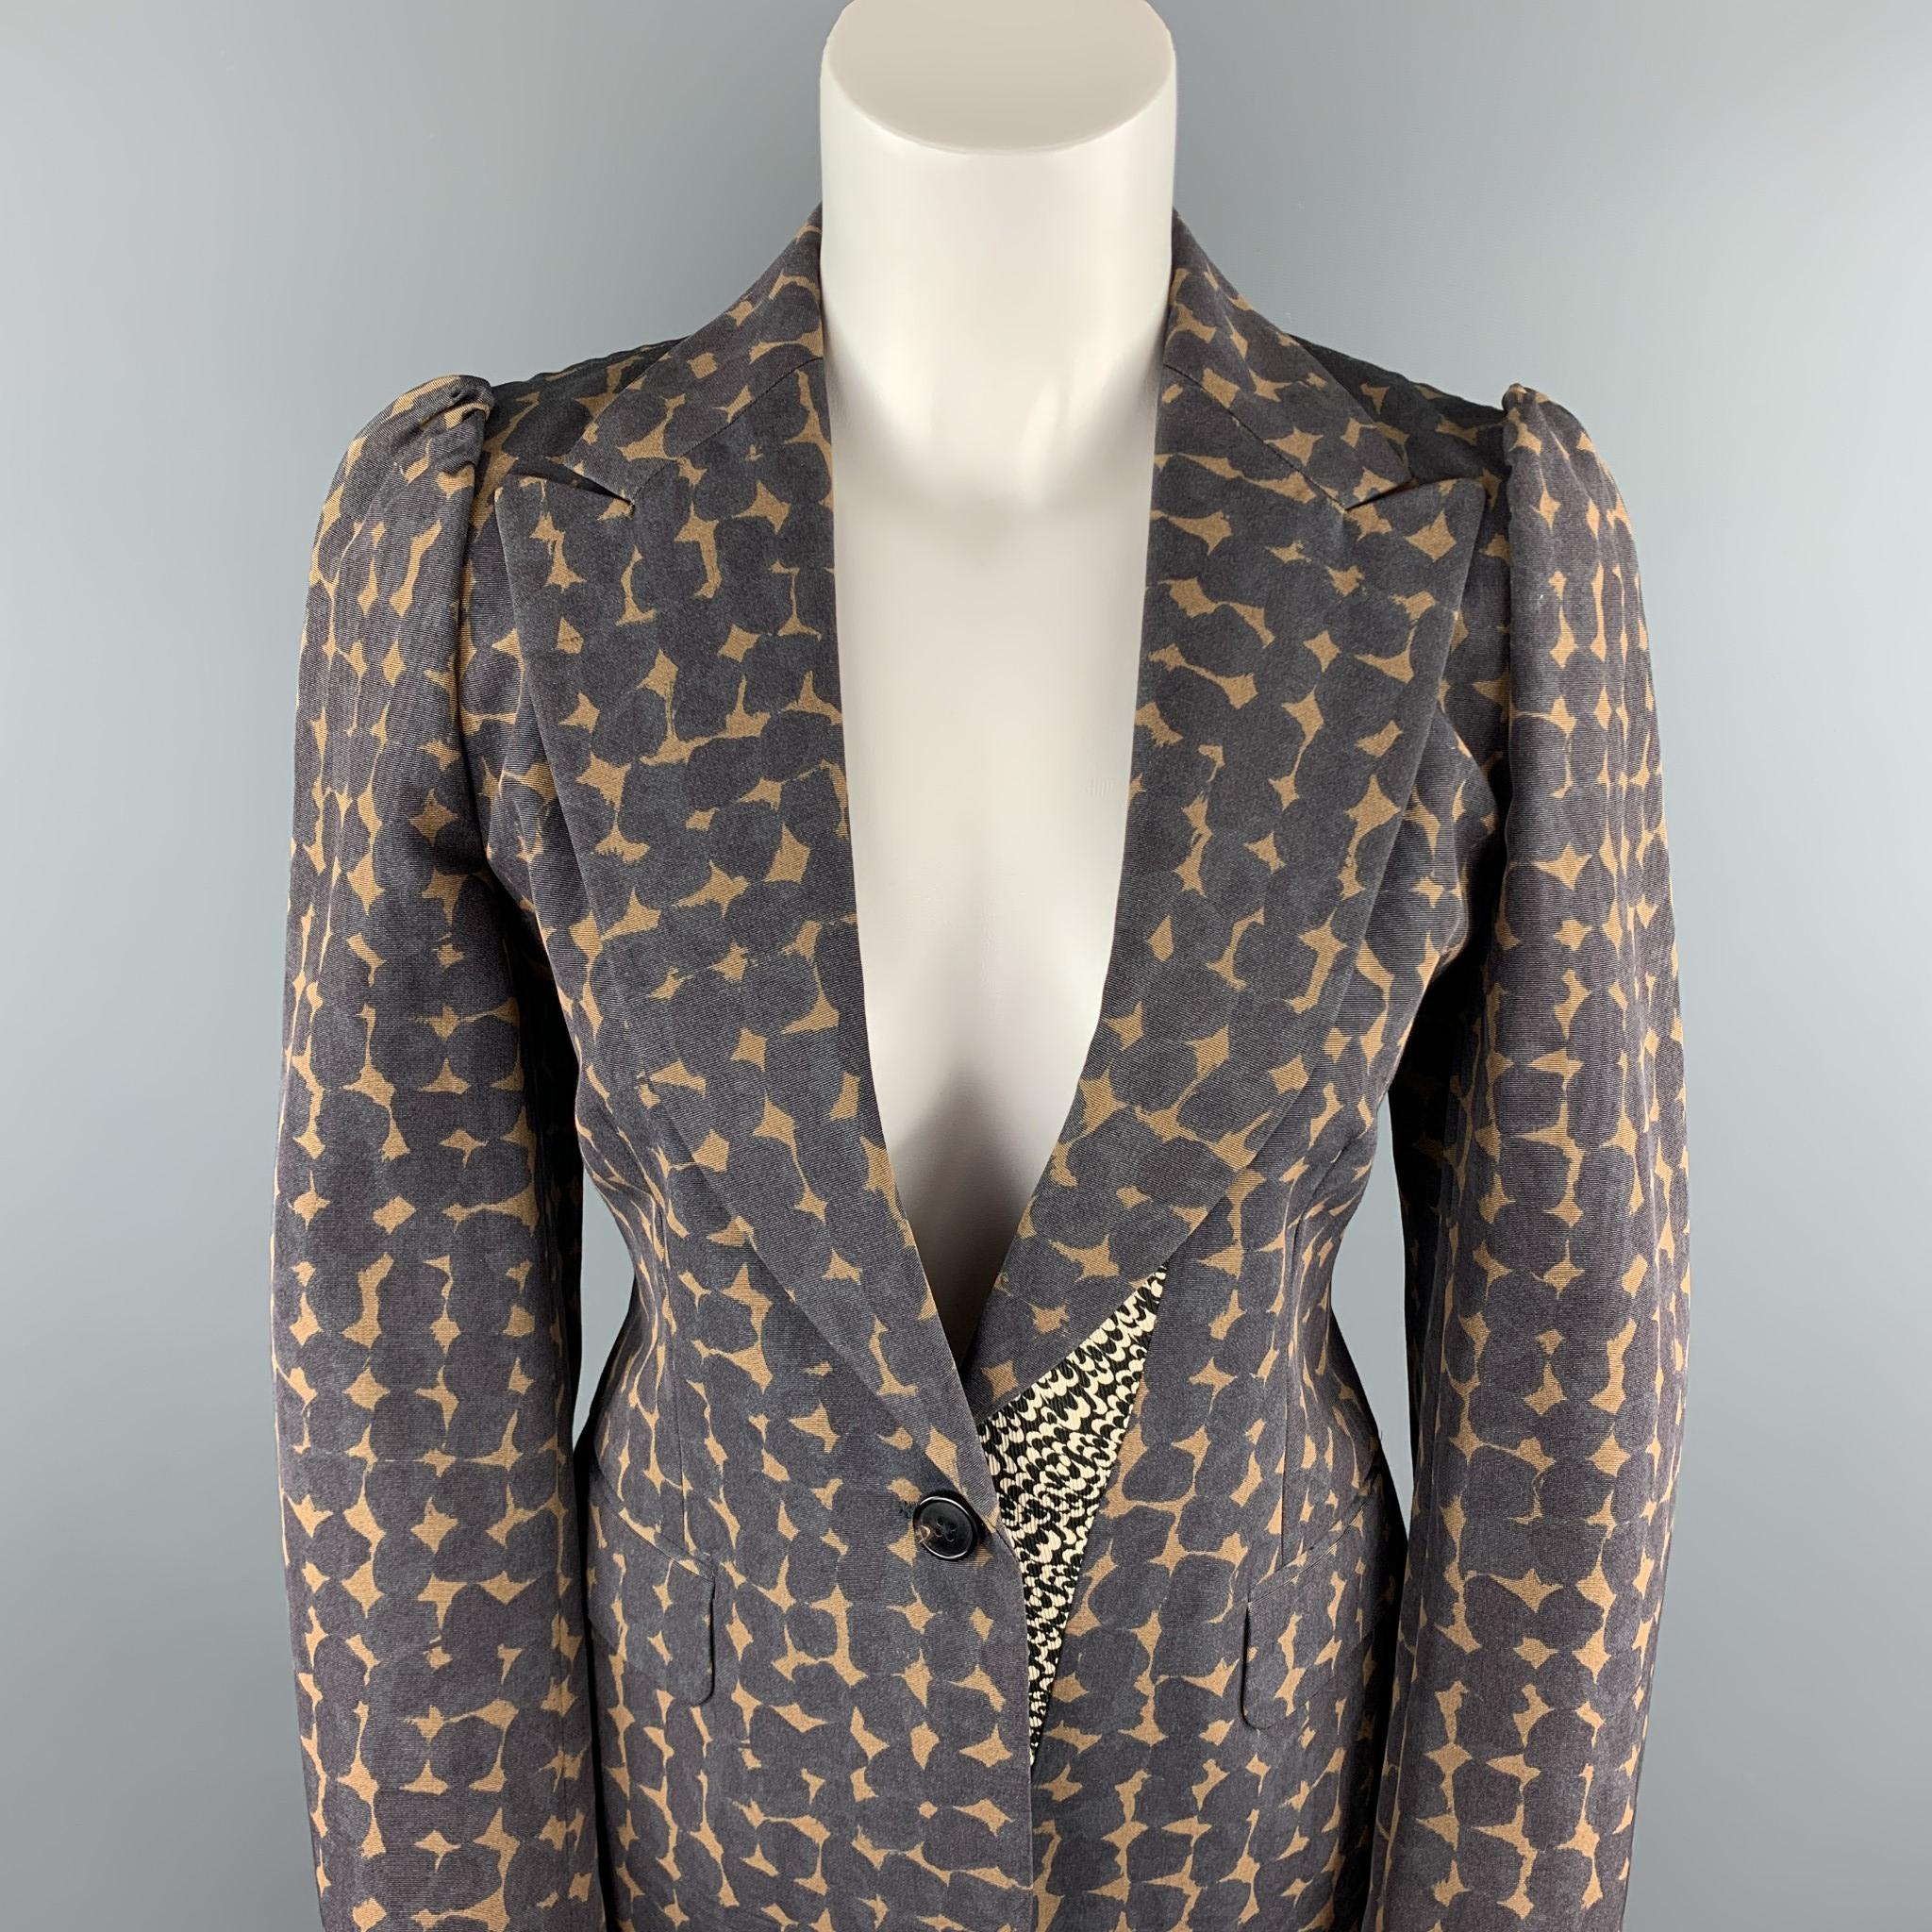 DRIES VAN NOTEN blazer comes in a dark gray & tan print cotton & rayon with a full brown liner featuring a peak lapel, flap pockets, and a single button closure.

Excellent Pre-Owned Condition.
Marked: 38

Measurements:

Shoulder: 15 in. 
Chest: 34